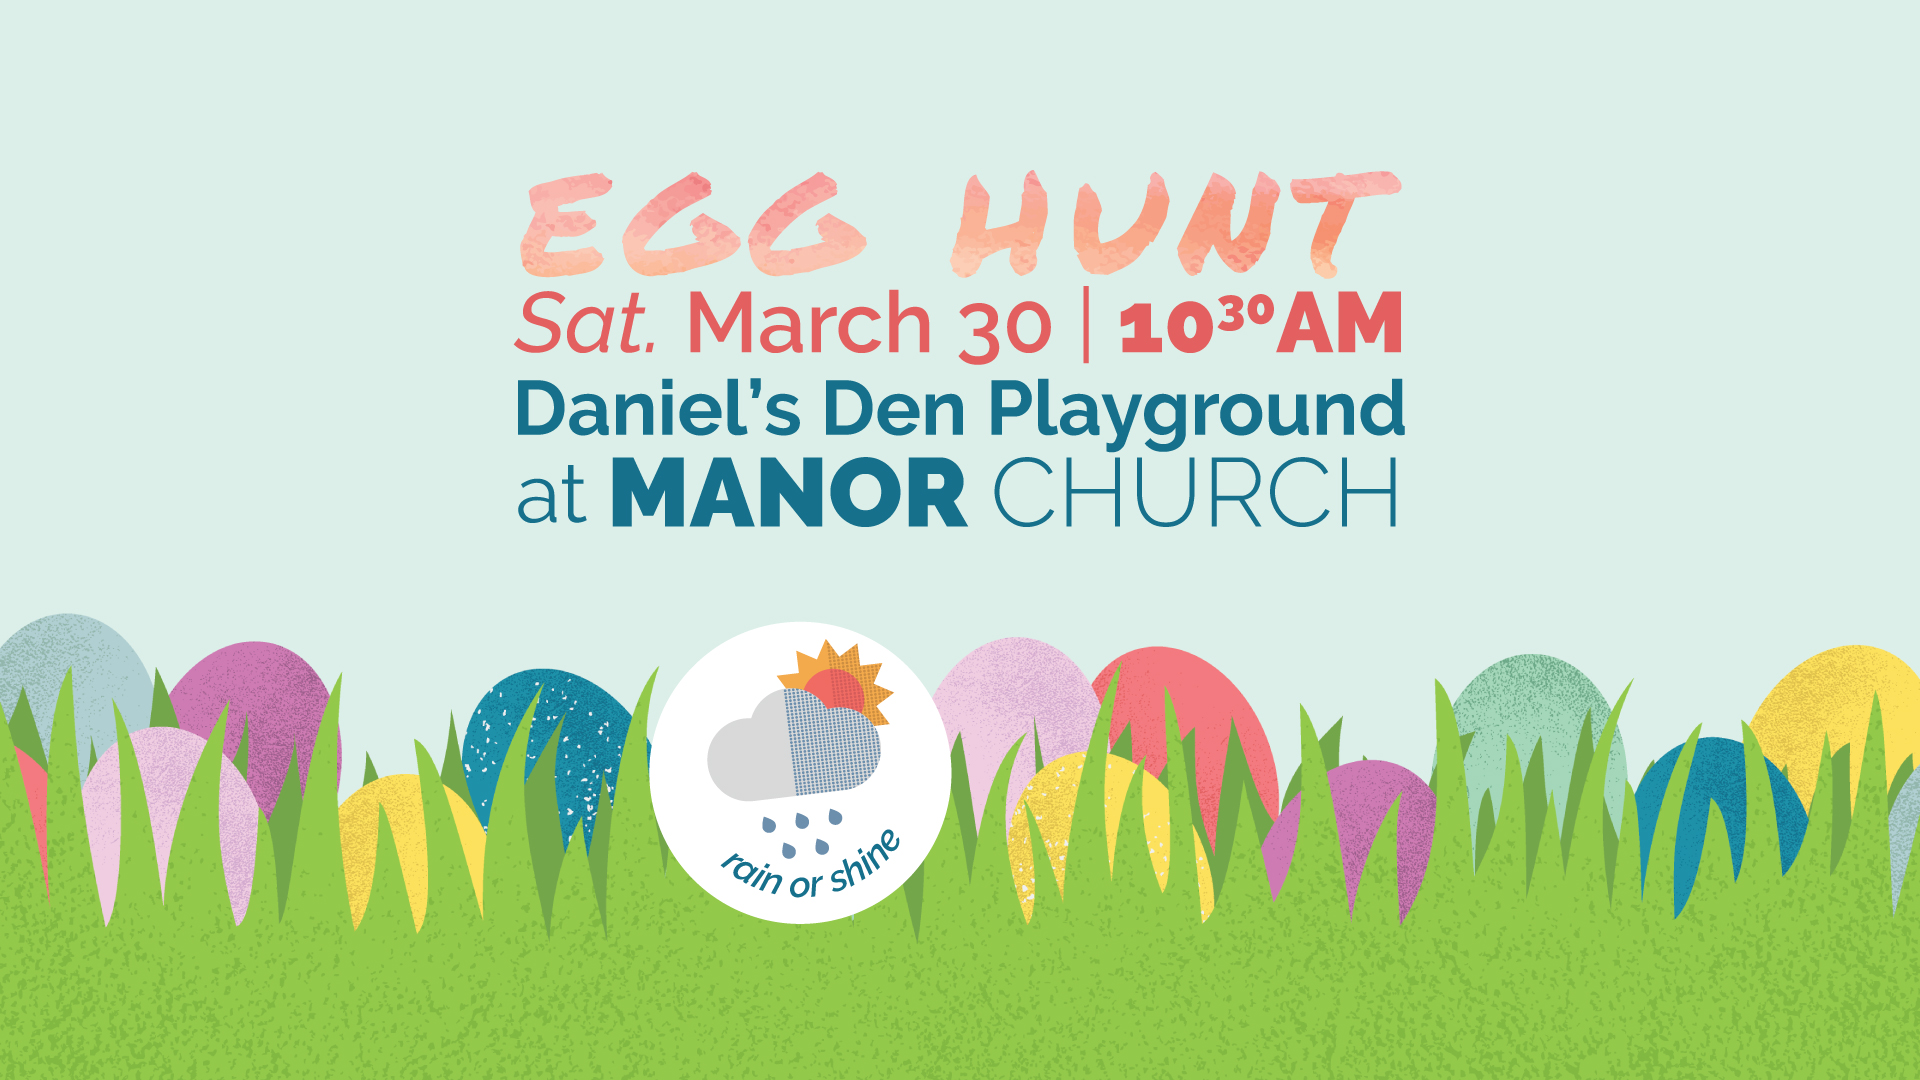 Egg Hunt | Saturday, March 30 at 10:30am | Daniel's Den Playground at Manor Church. Event held rain or shine. Adapted Egg Hunt available!